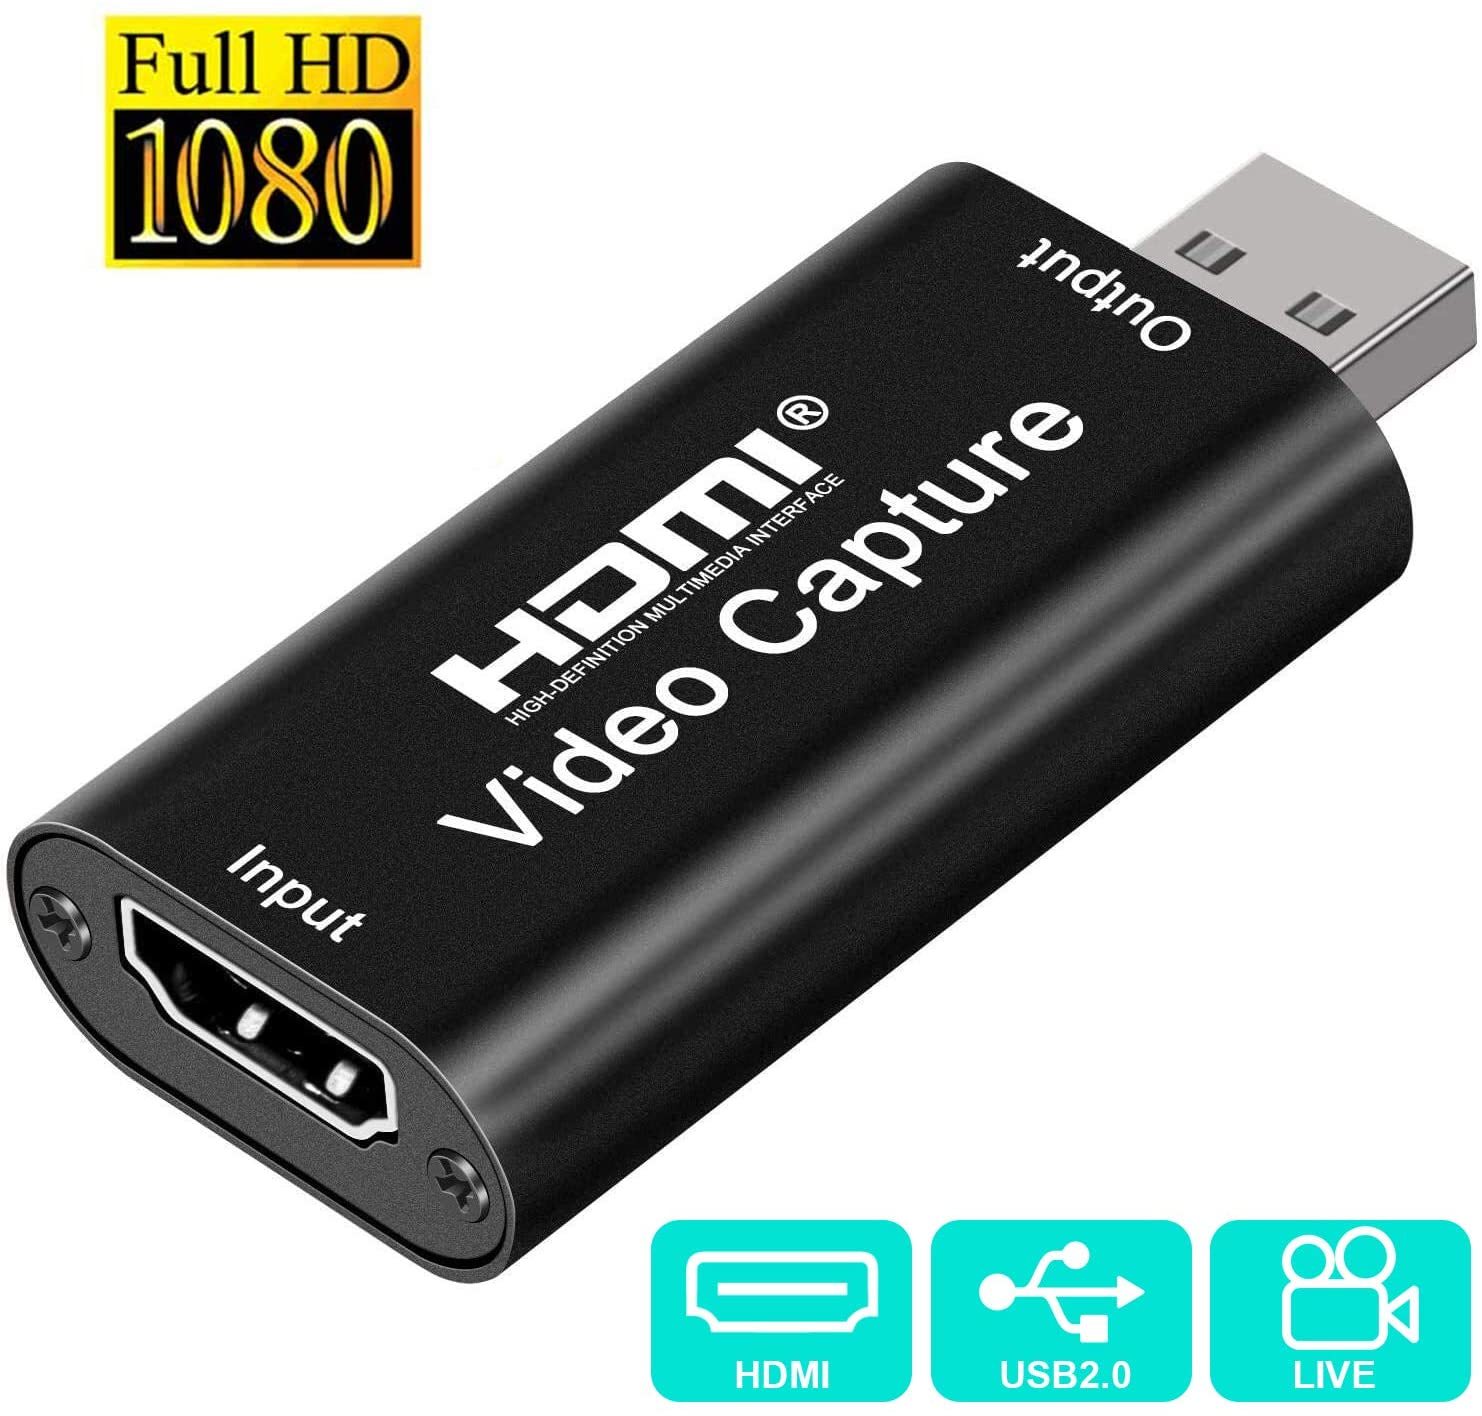 Dtech Explore the latest innovations in our newest product line-Hdmi capture card!